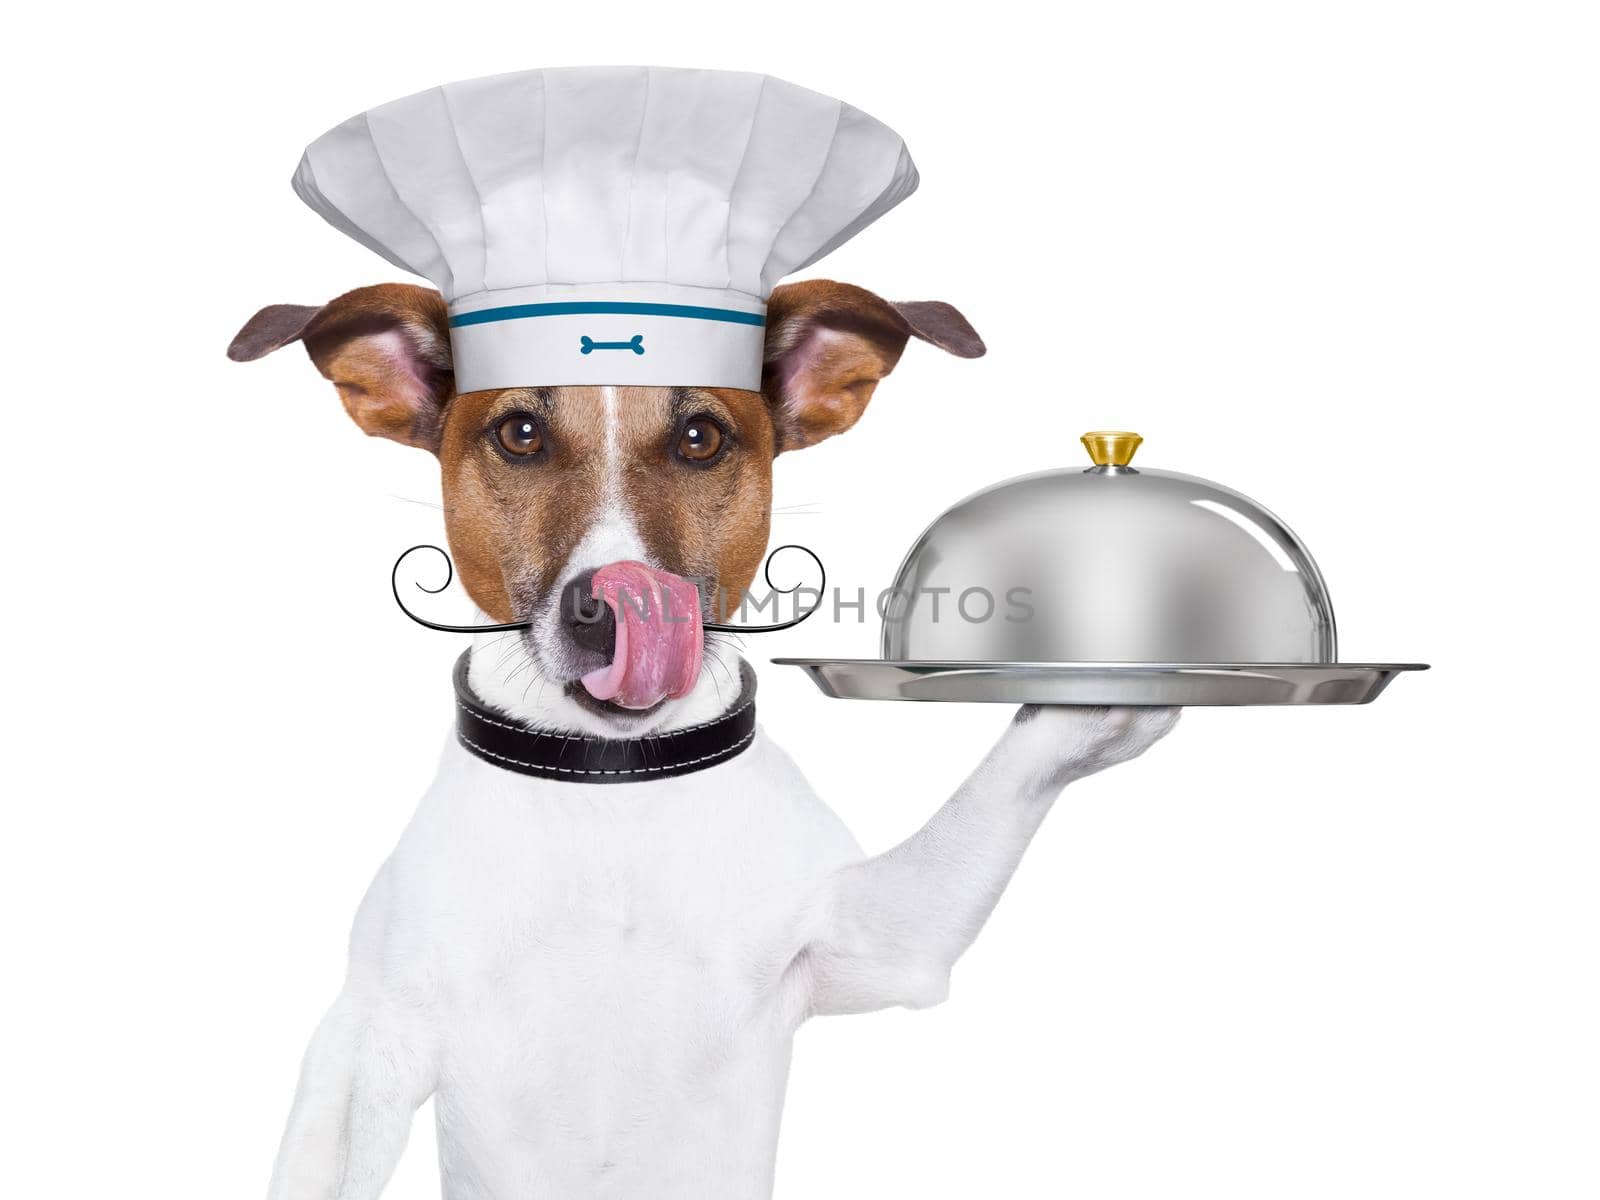 cook dog holding a serving tray with cover